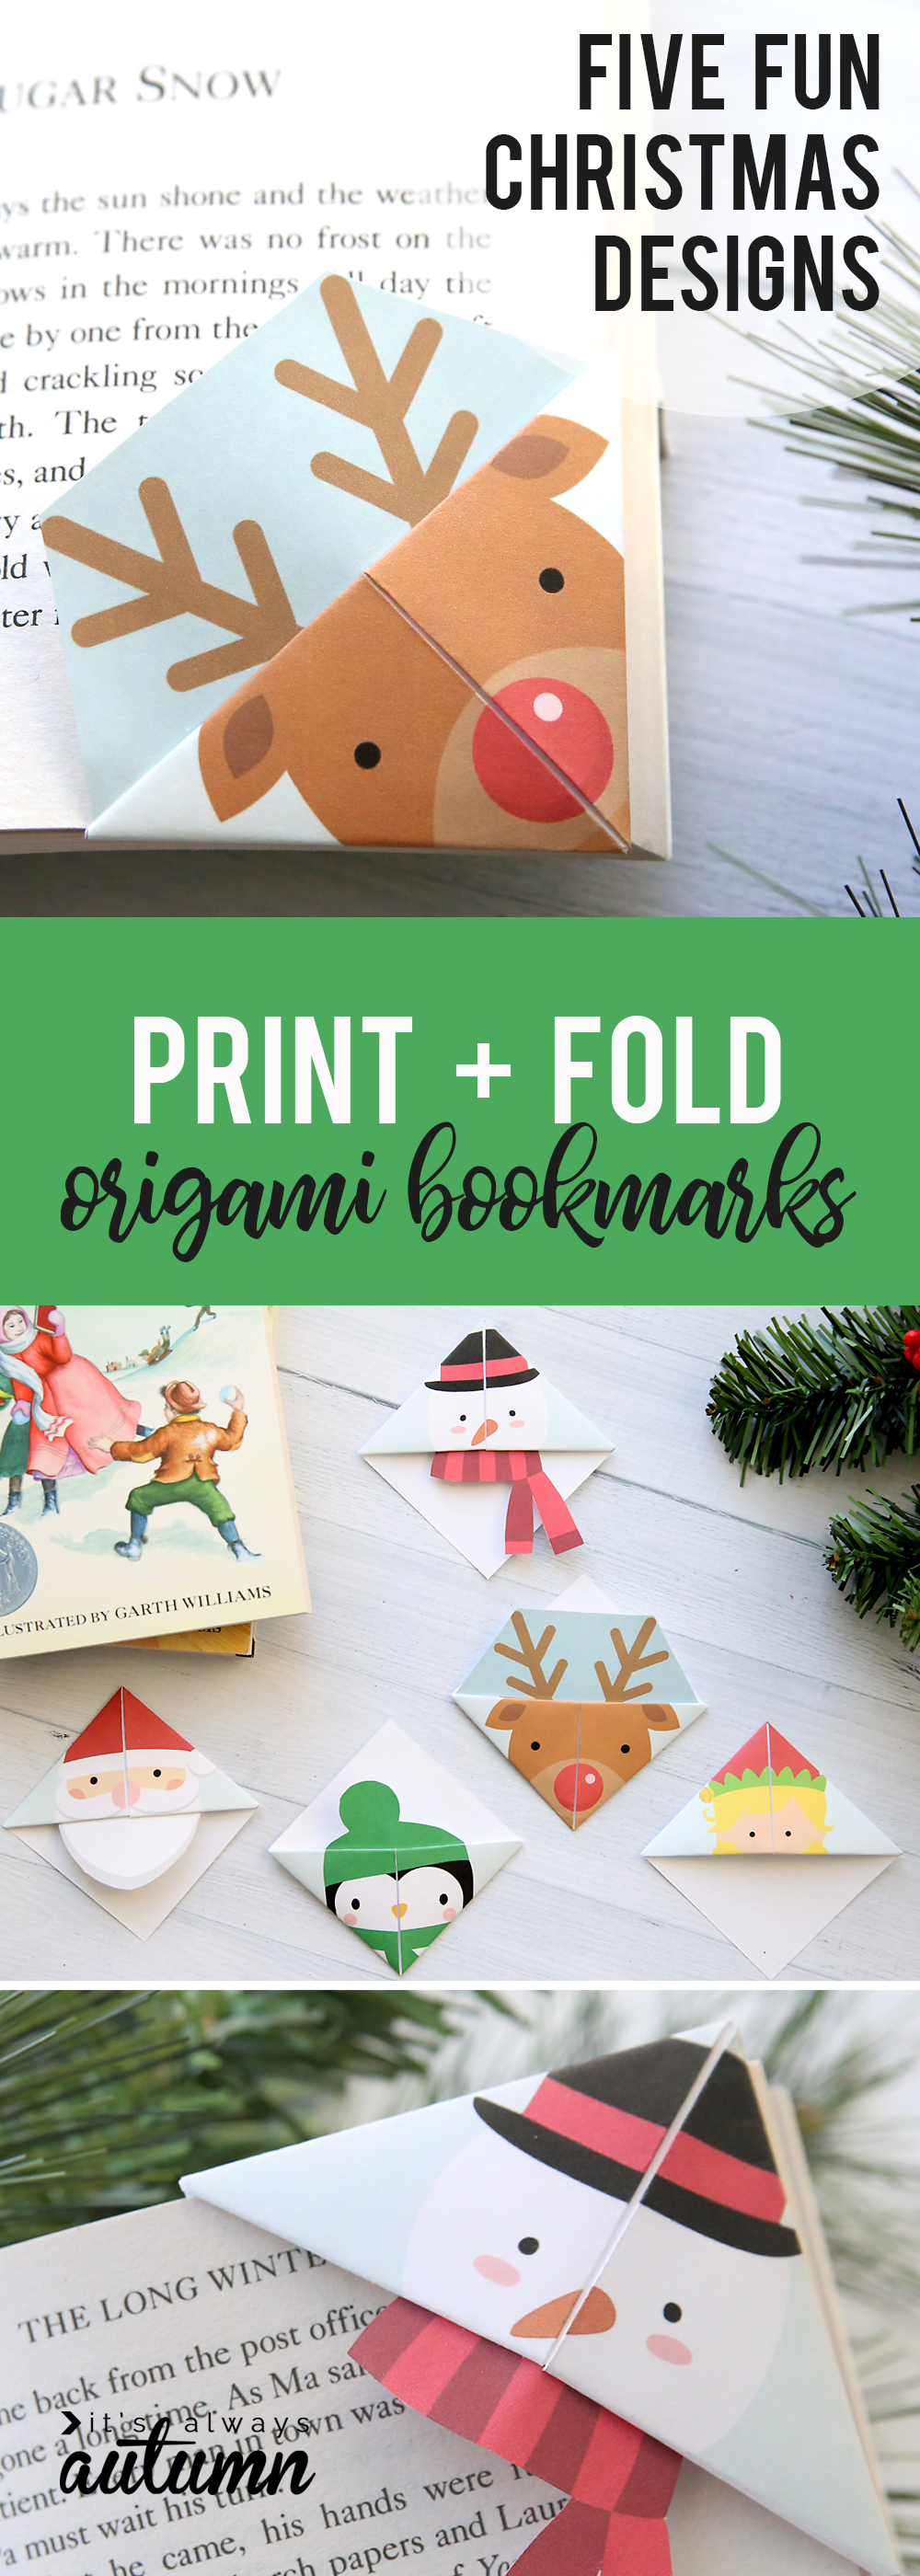 Print and Fold origami bookmarks in various Christmas characters